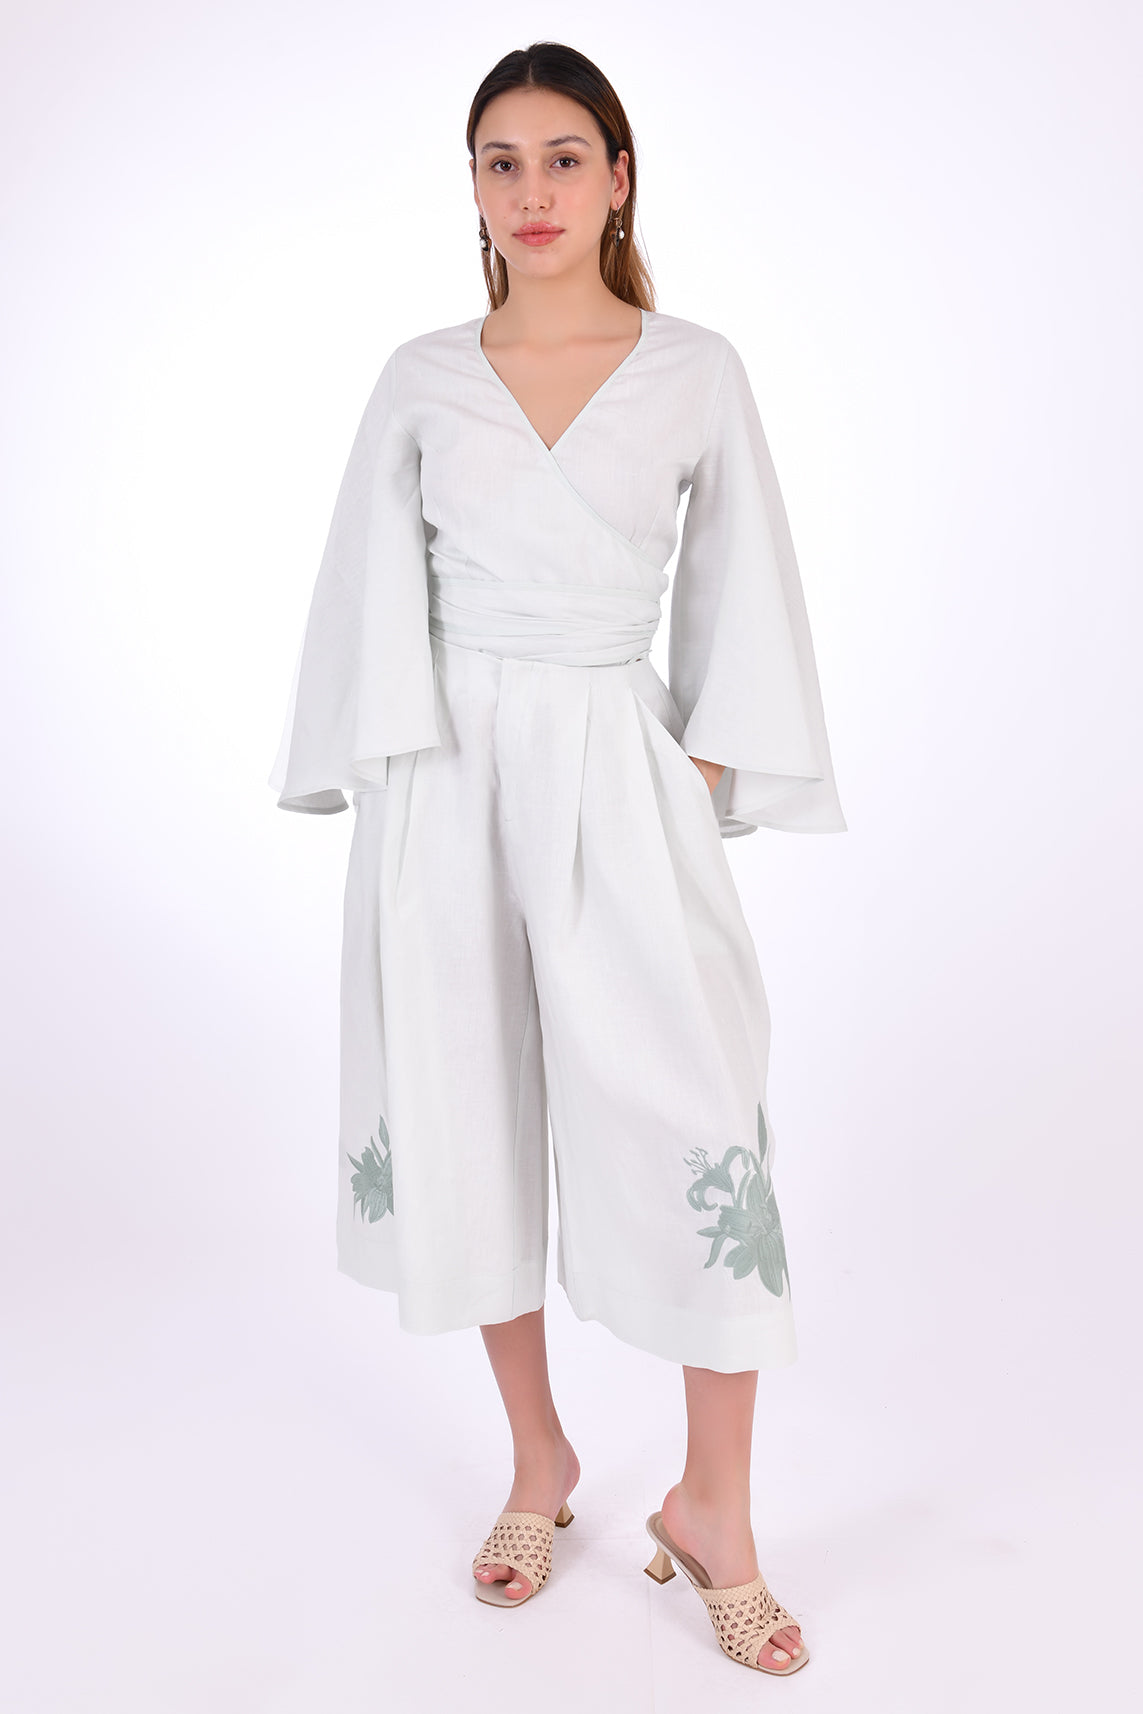 Fanm Mon Des-Vu Linen Shorts Set (Front View). 2-Piece Linen Shorts & Top Set. Featuring a wrap top with wide long sleeves and long pleated shorts with embroidery.